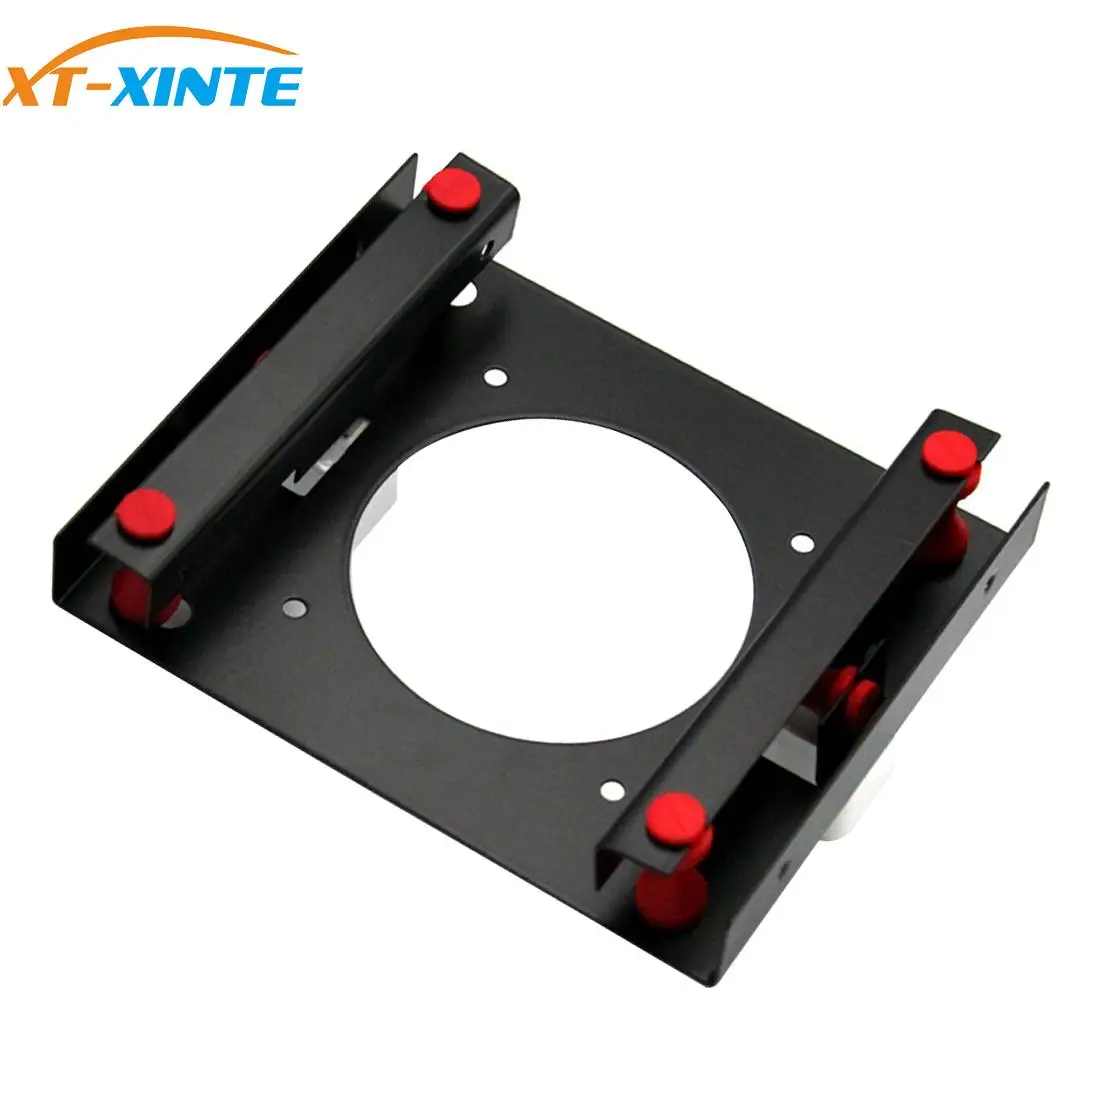 

XT-XINTE Shock-Proof 3.5 Hard Disk to 5.25 DVD ROM Bay Mounting adapter